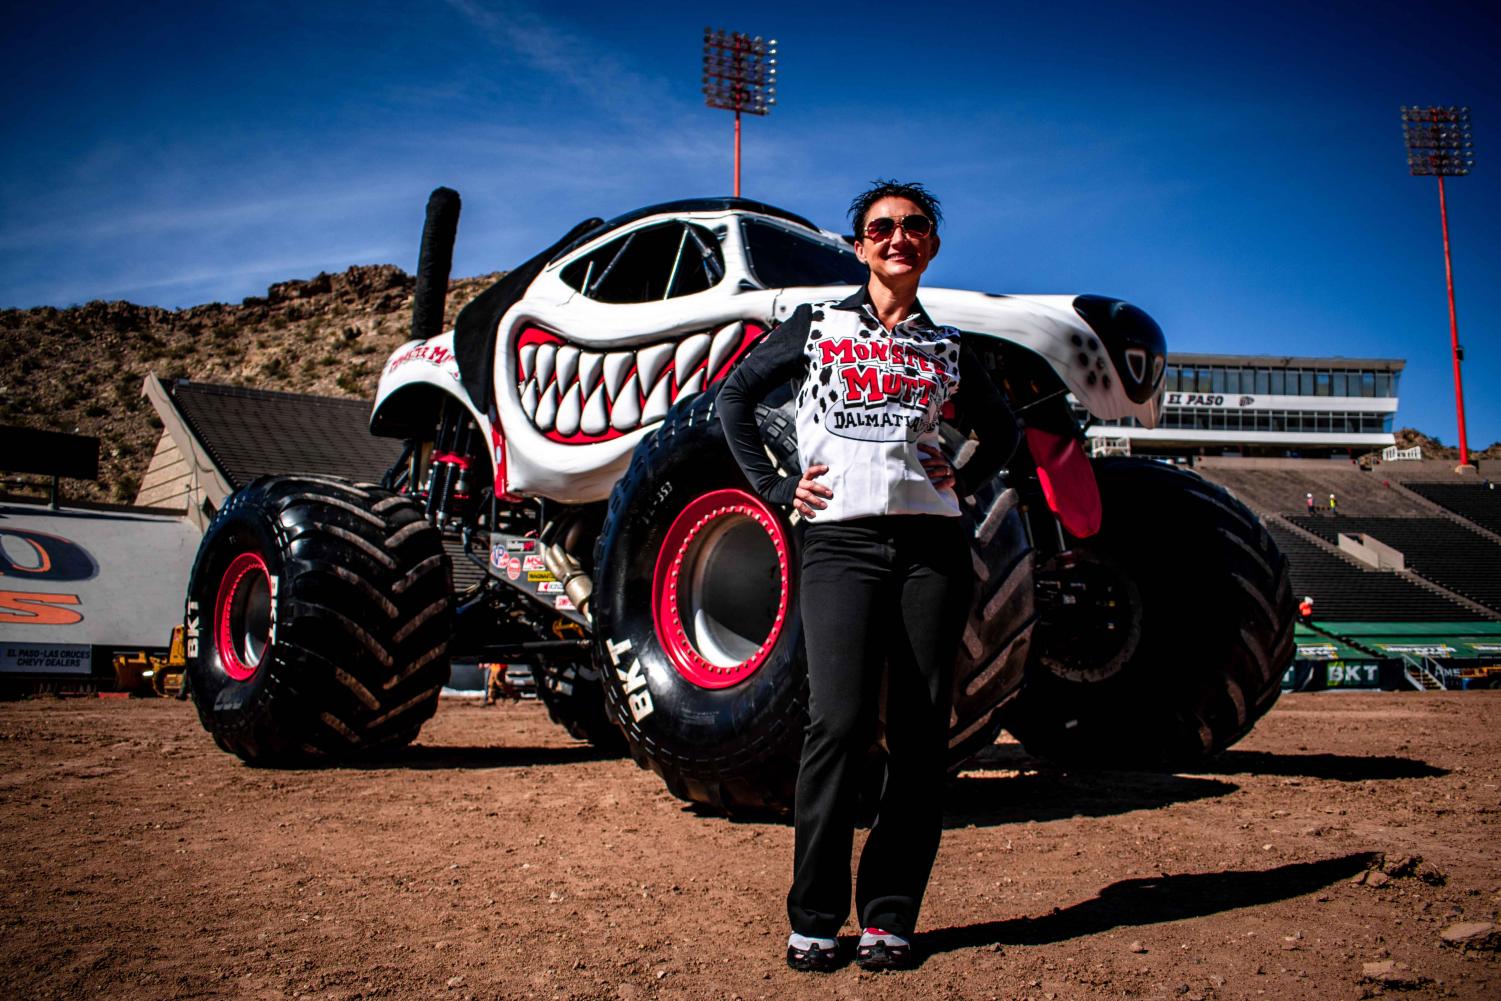 Monster+Jam+returns+to+UTEP+for+two+action+packed+days